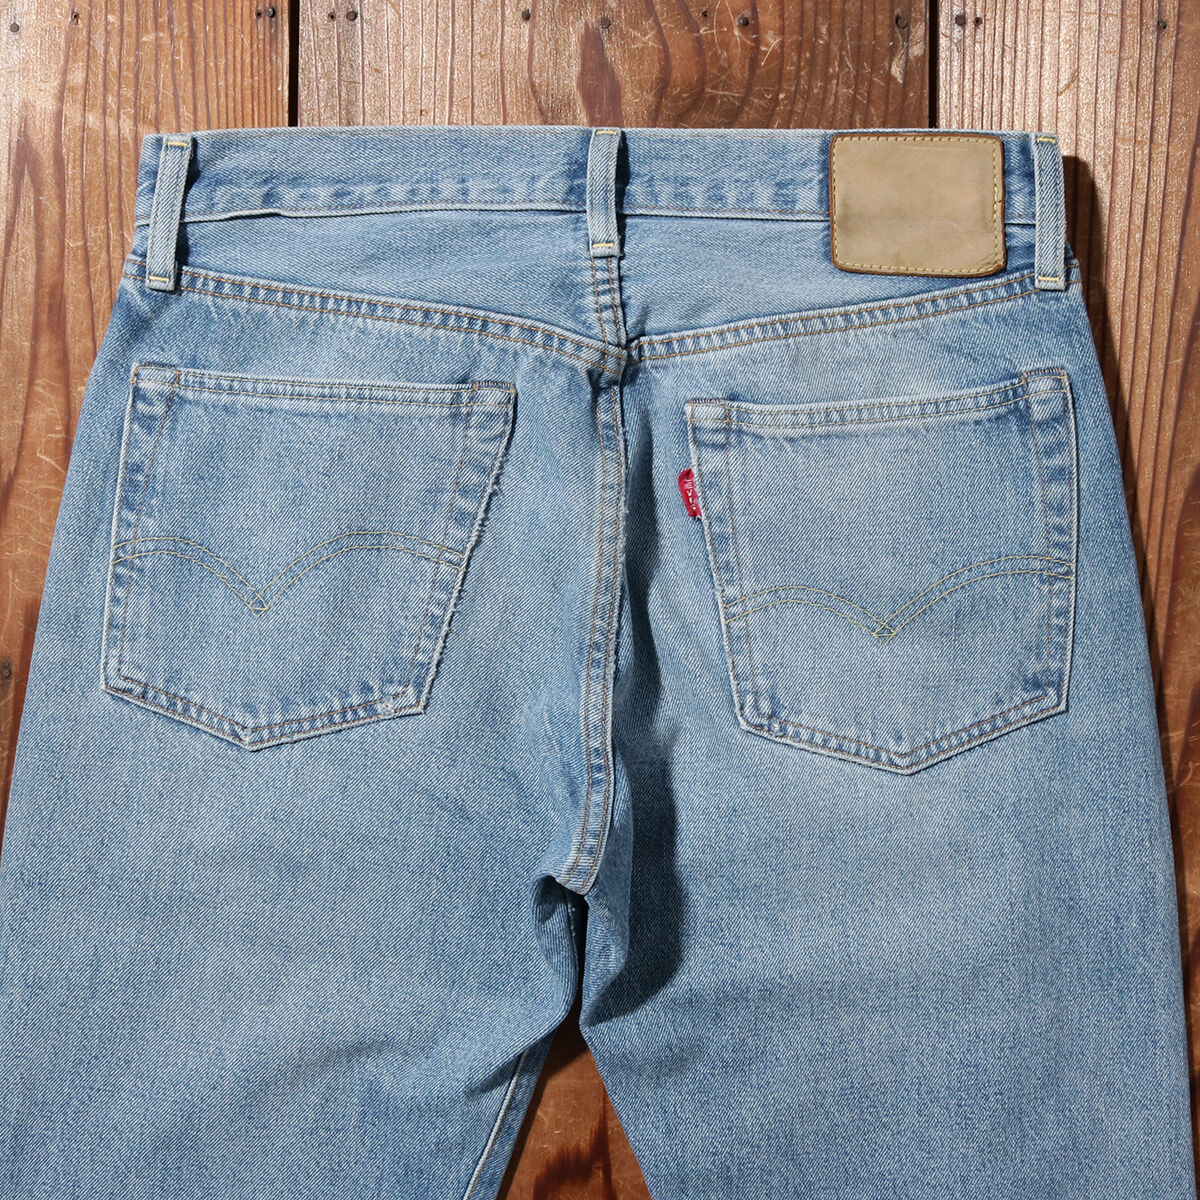 levis tall jeans